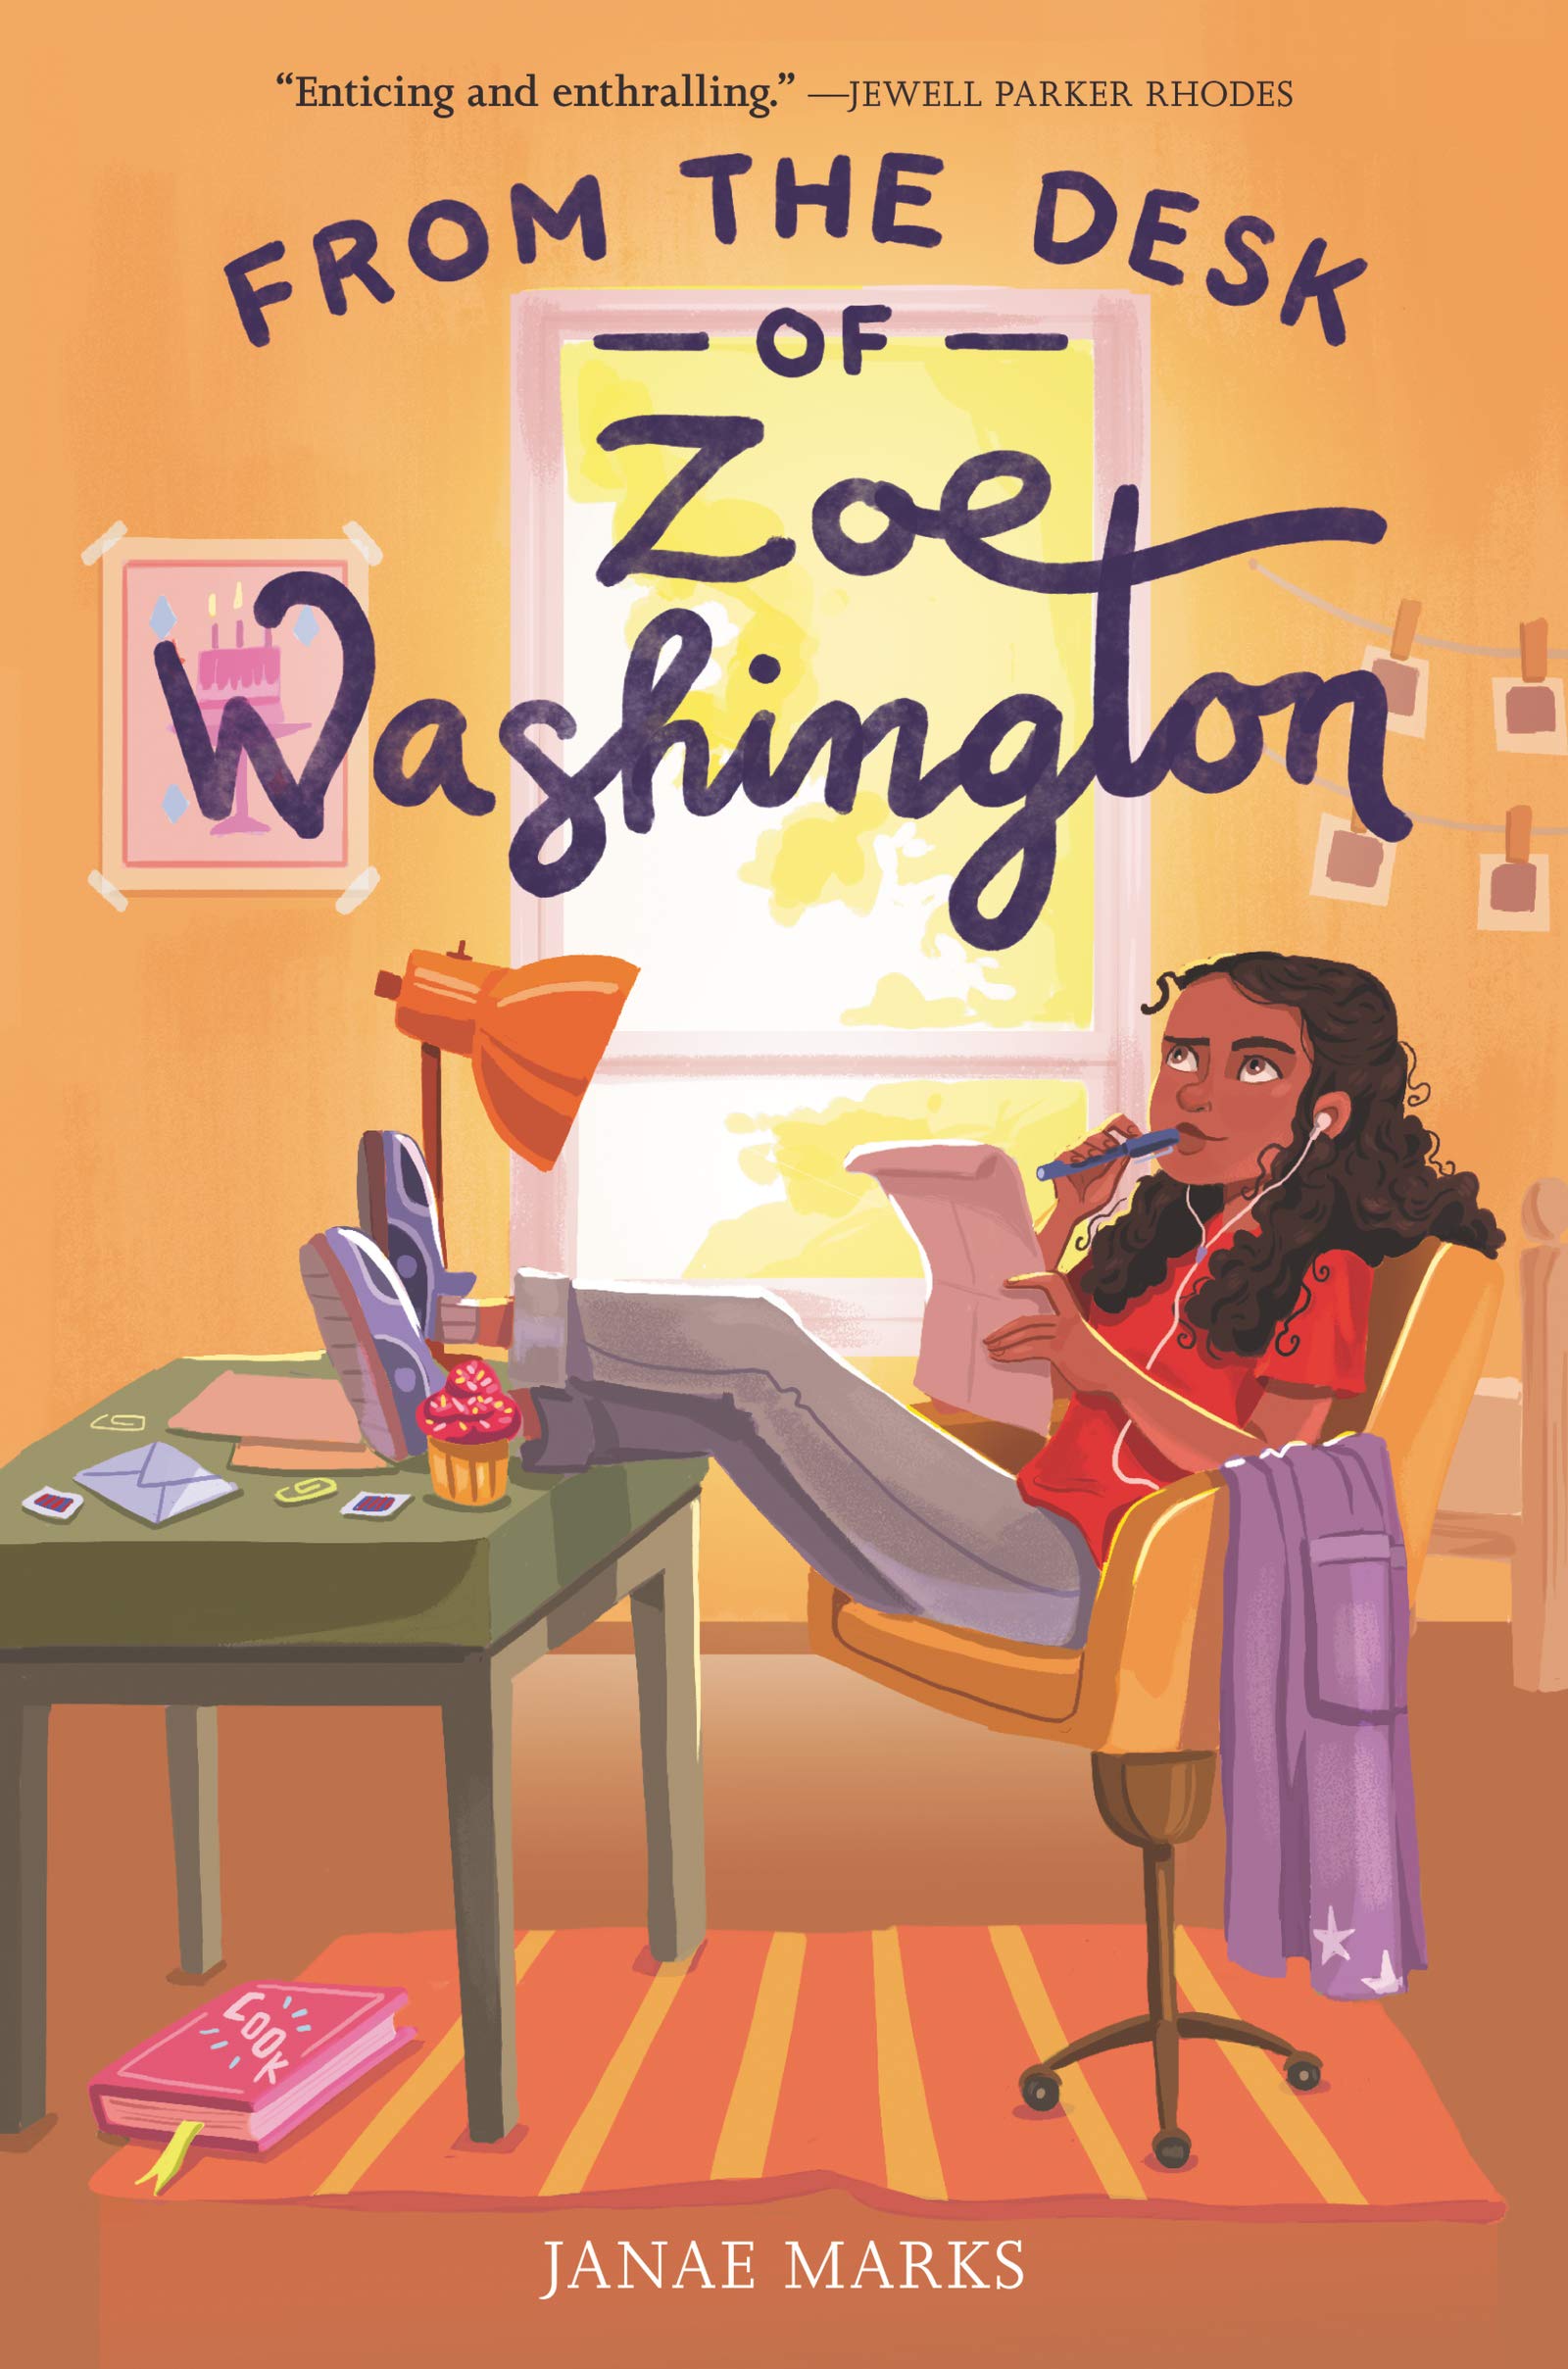 From the Desk of Zoe Washington book cover.